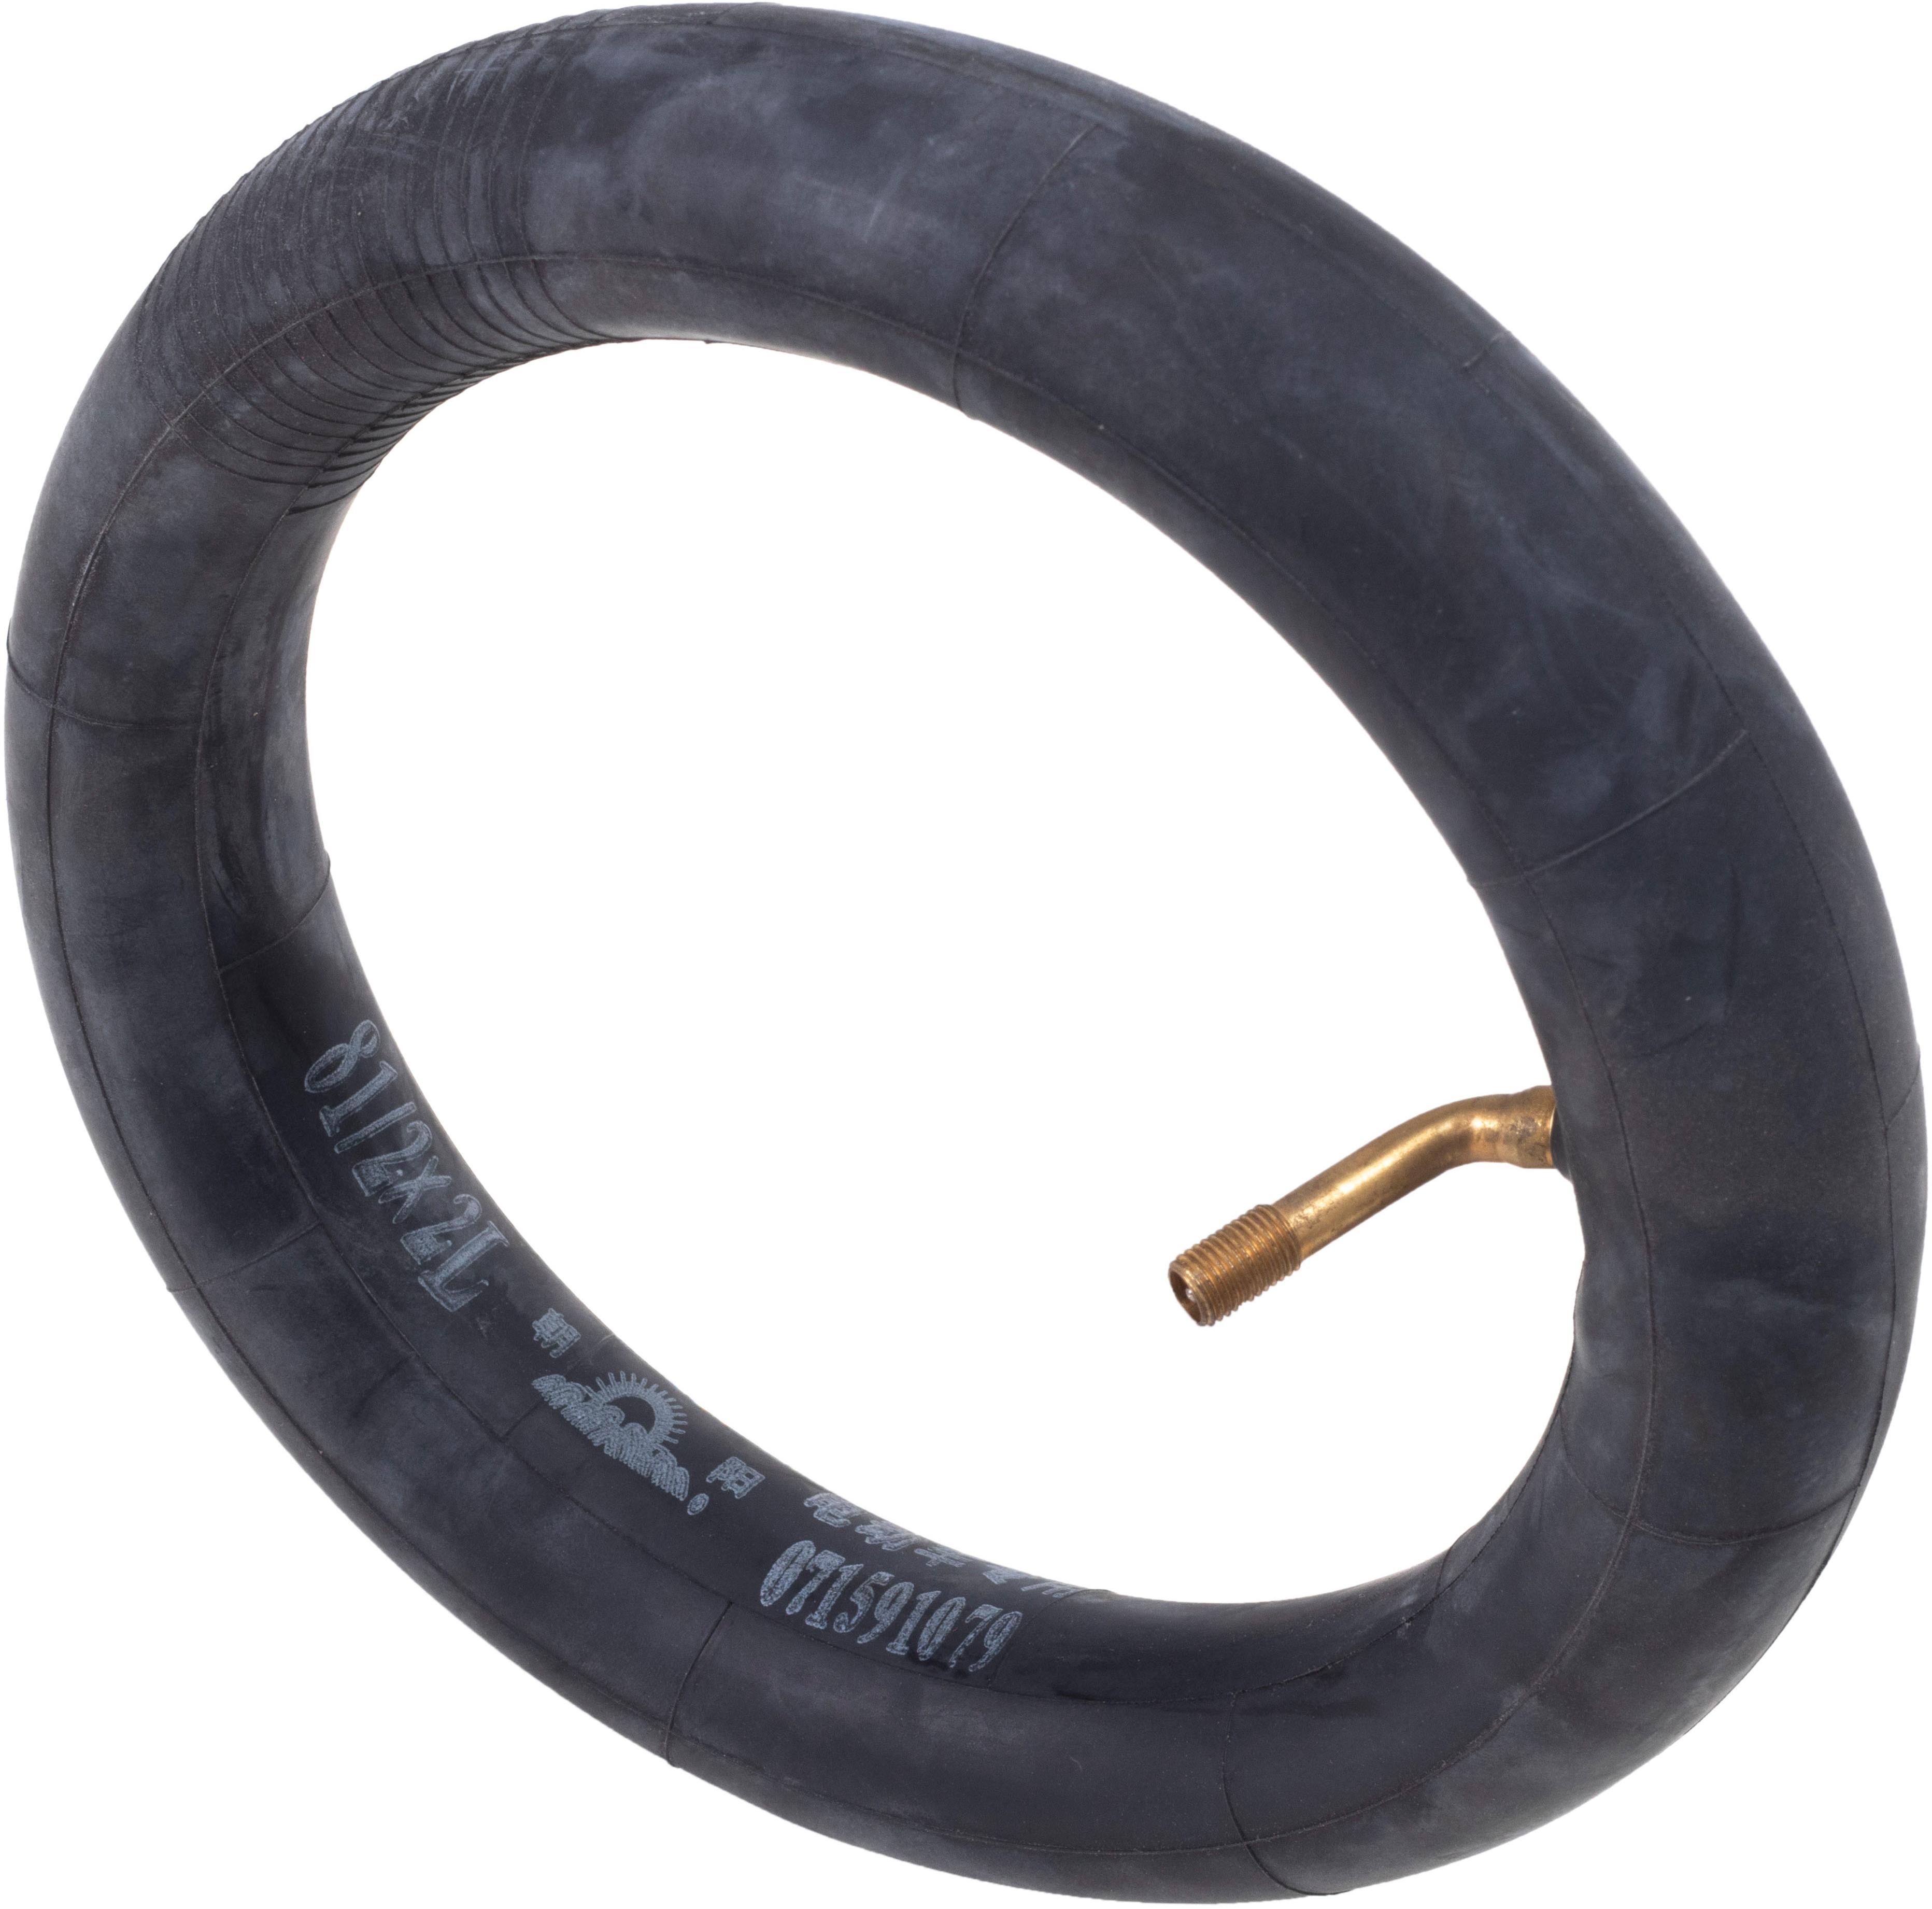 Carrera Impel Is-1 Electric Scooter Inner Tube 8.5 Inch